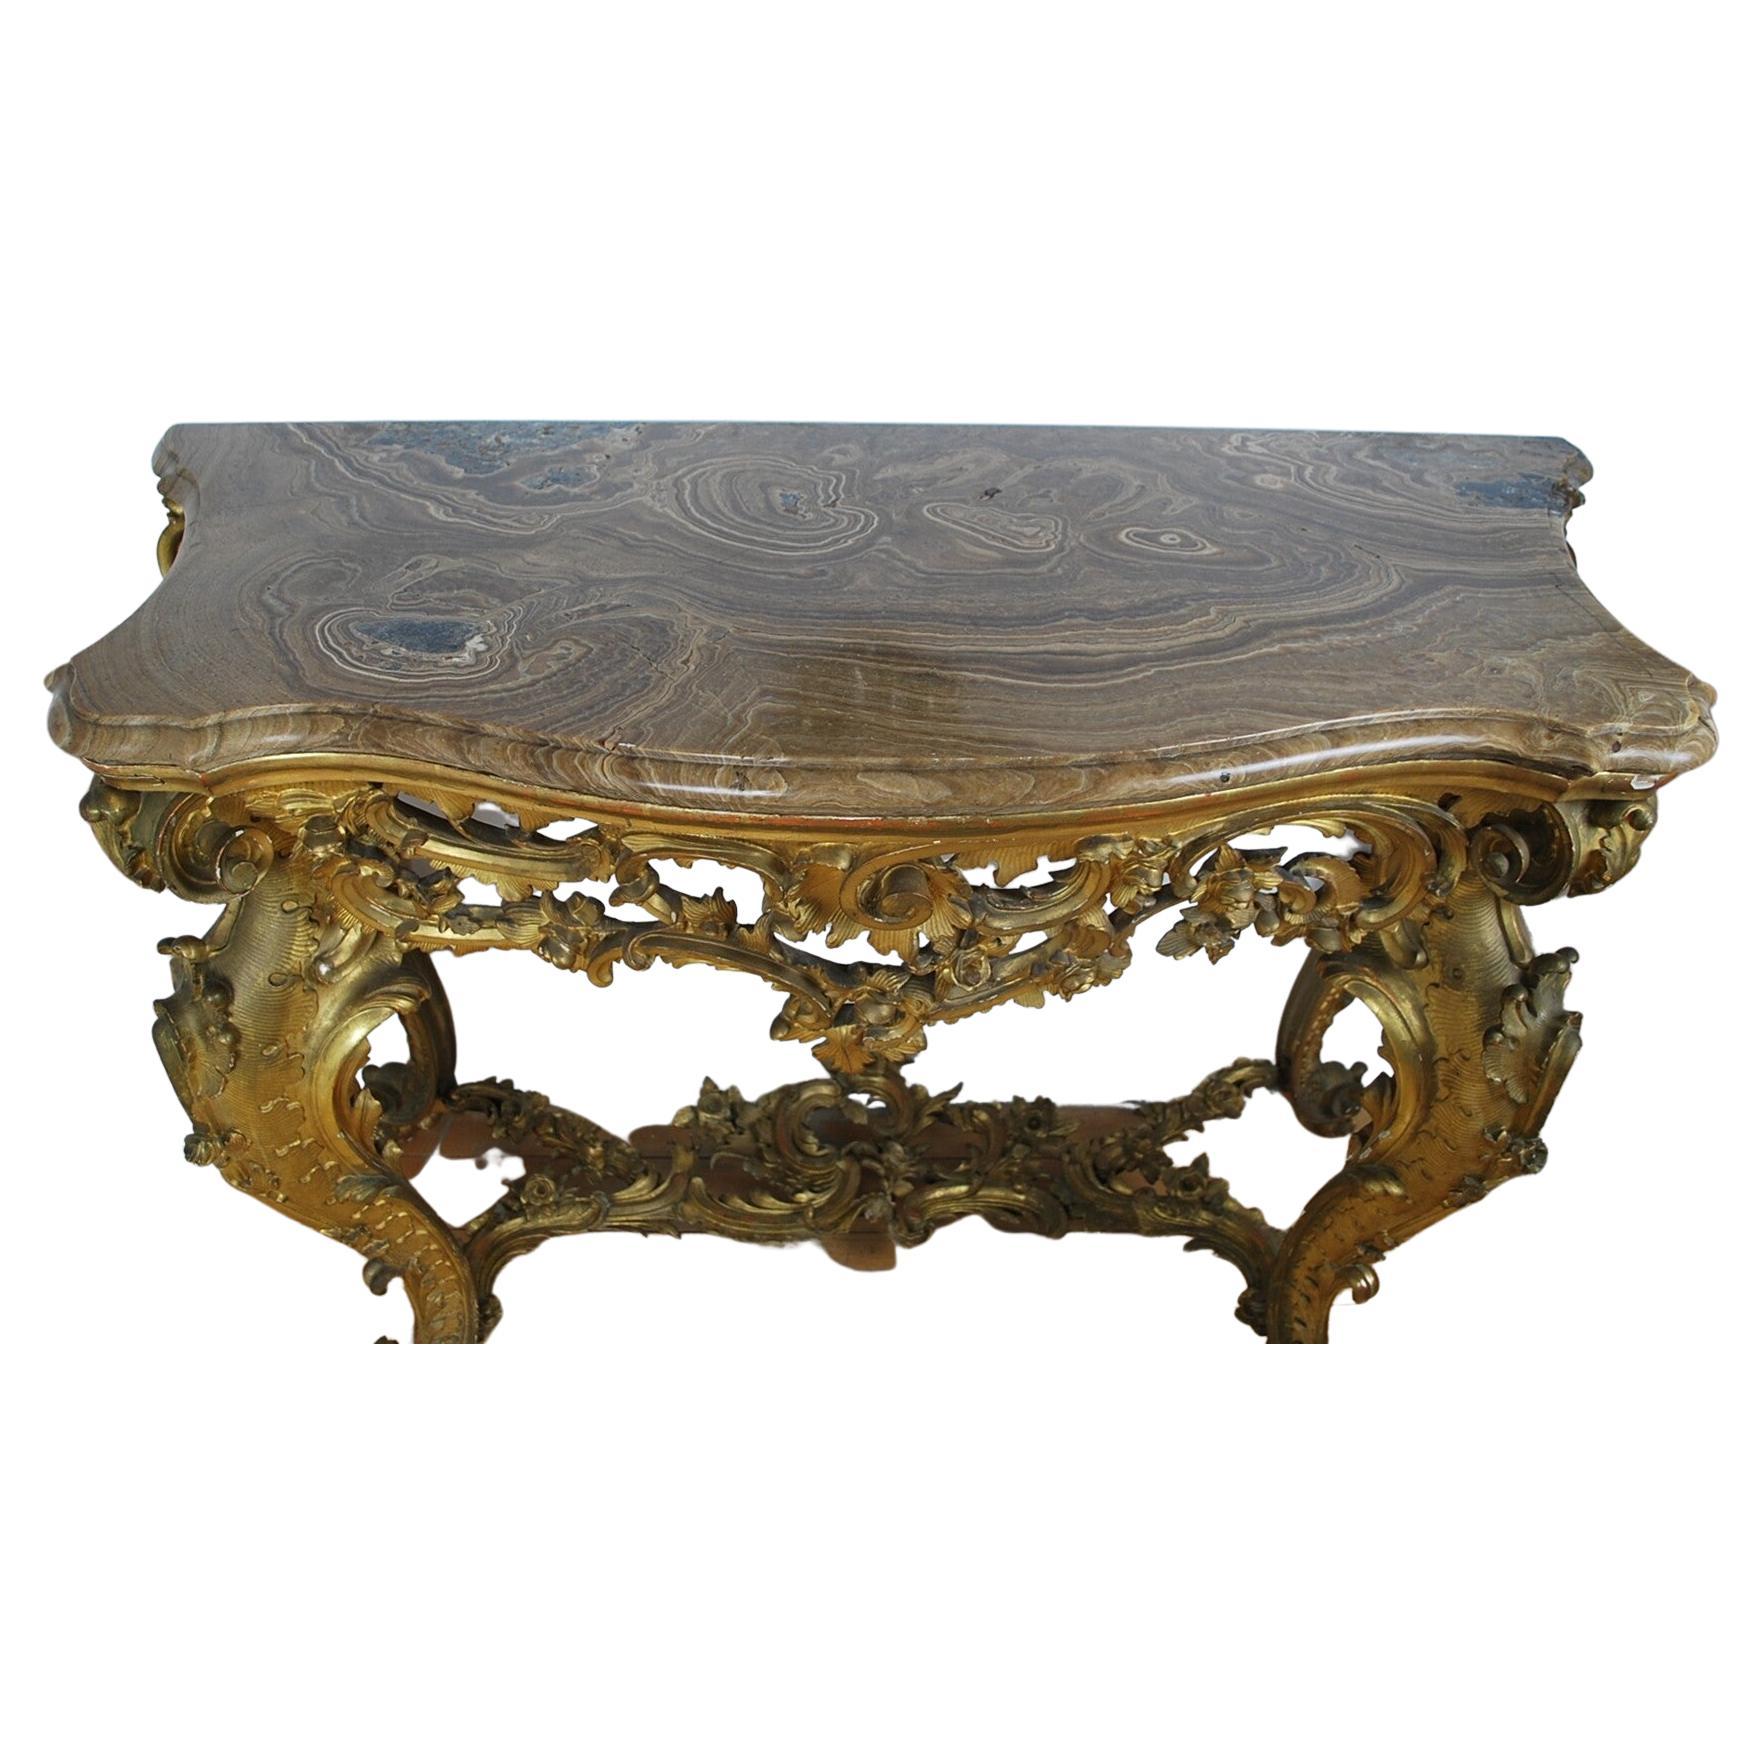 Early 19th century Tuscan console 